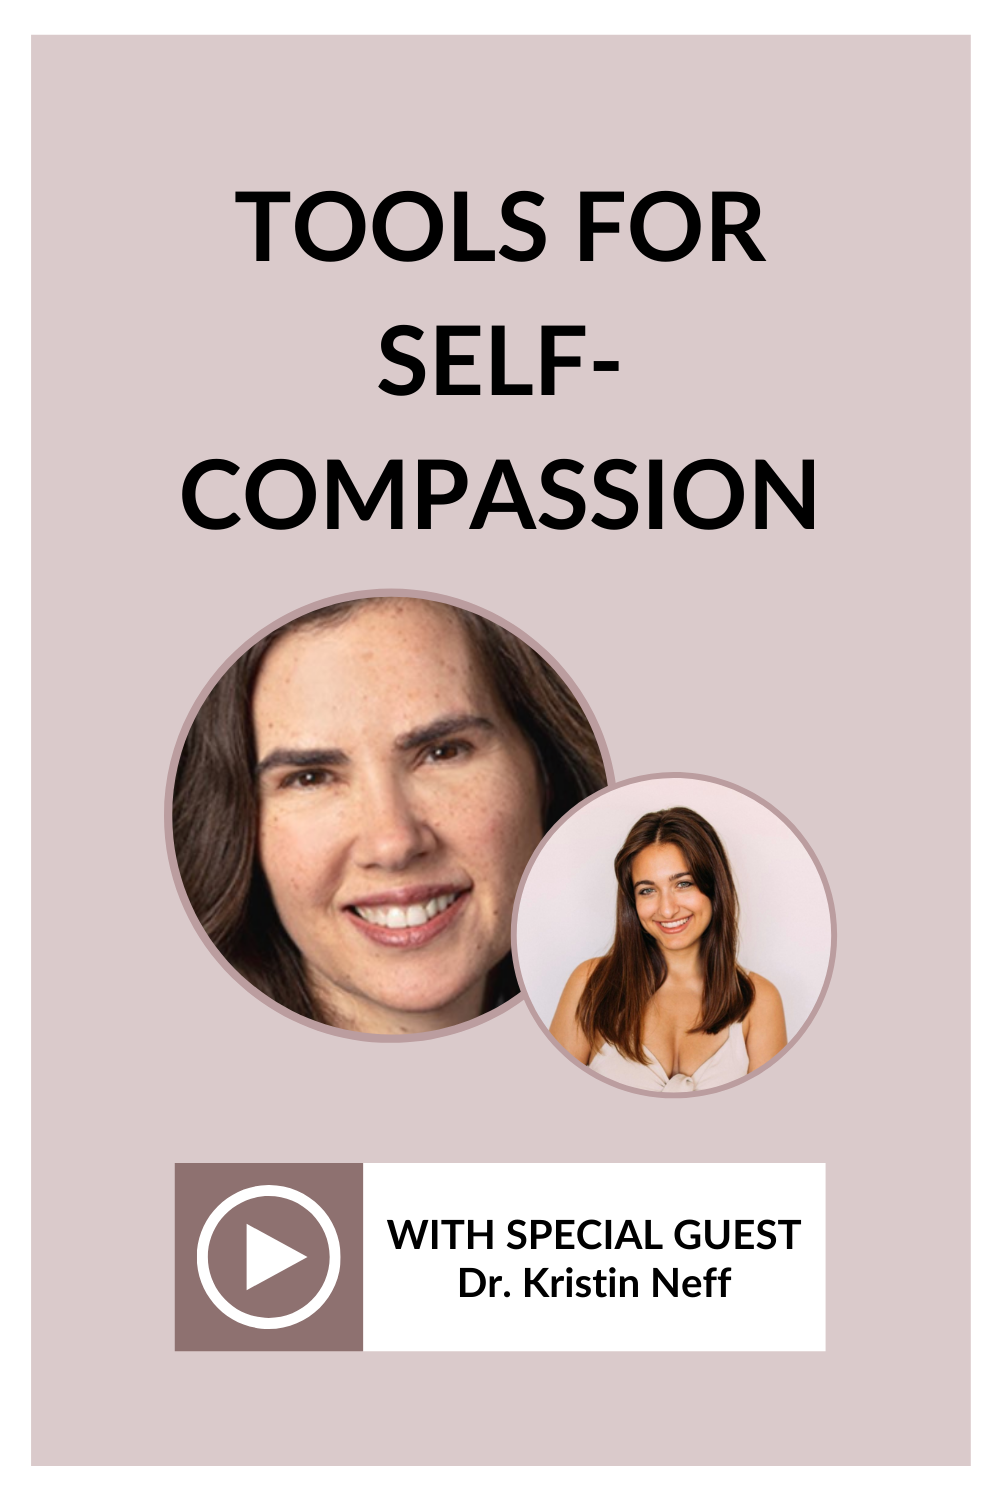 Do you want to learn how to practice self compassion? In this episode of the Mary's Cup of Tea podcast, Mary sits down with Dr. Kristin Neff to talk self-compassion exercises, self-compassion affirmations, and more!